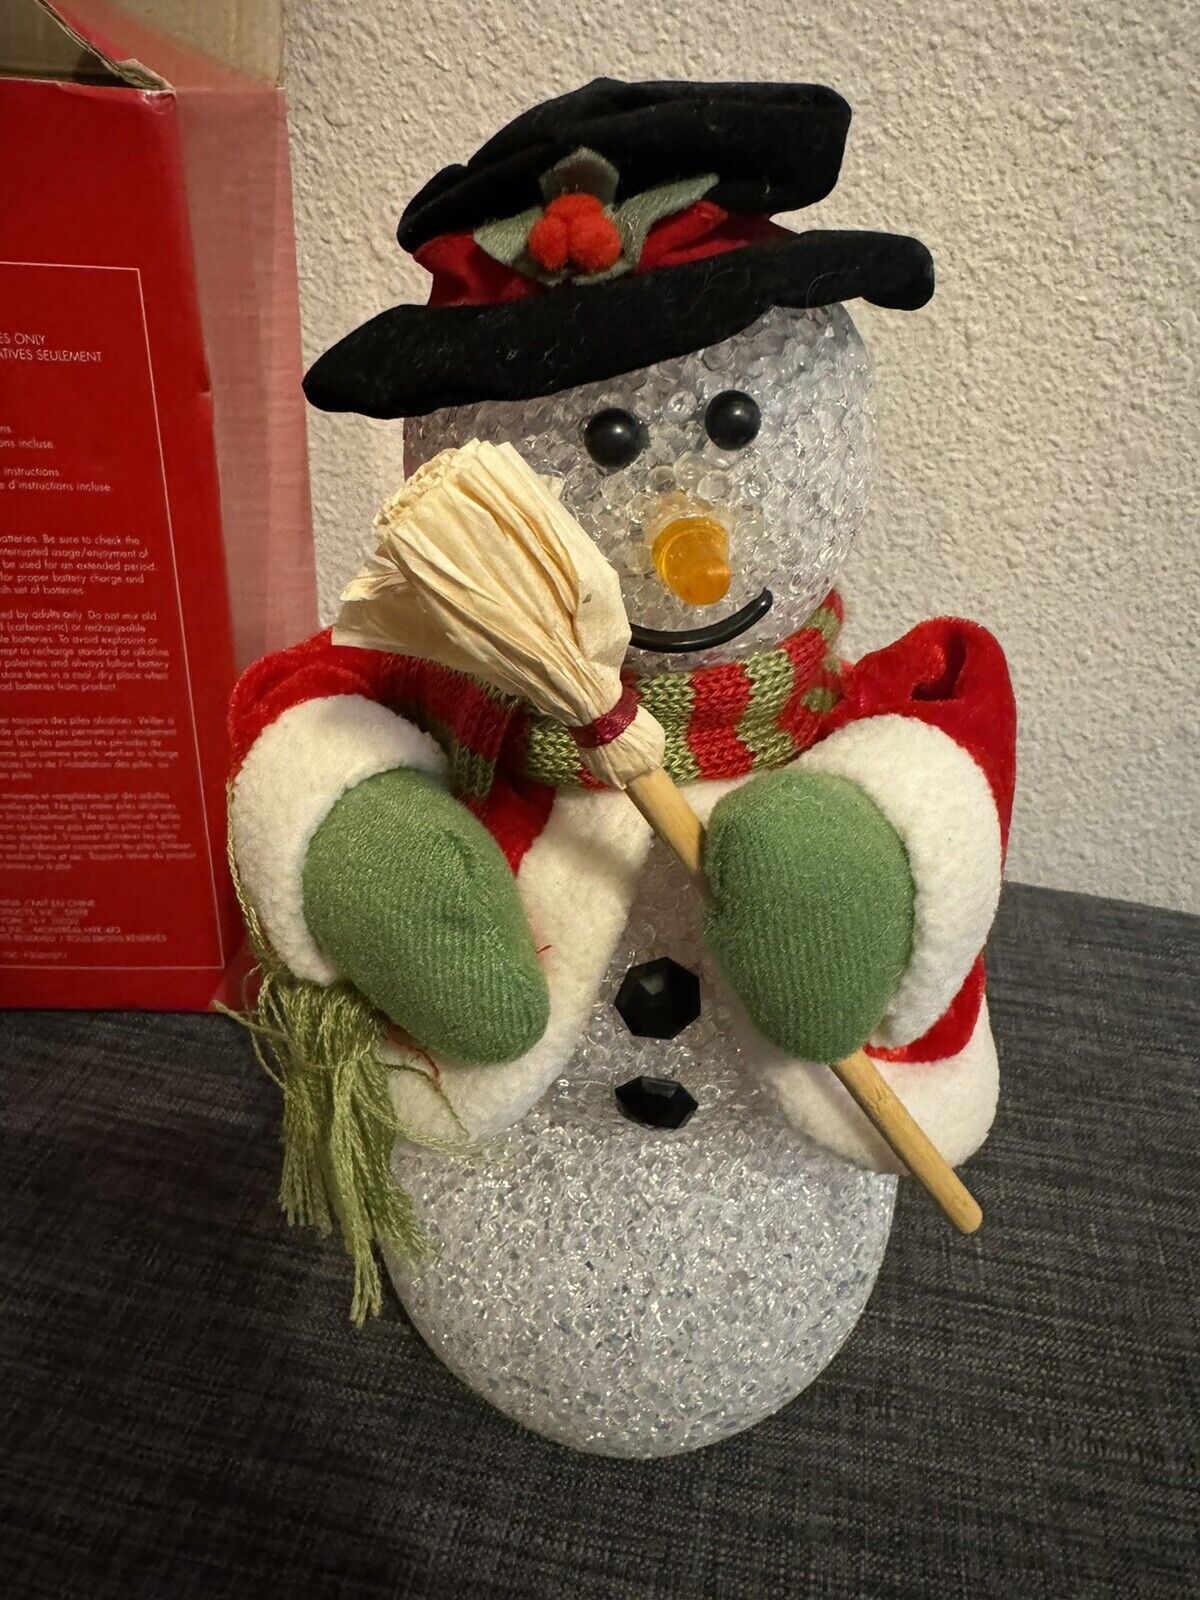 AVON Chilly Sam Animated Lighted Snowman Figure